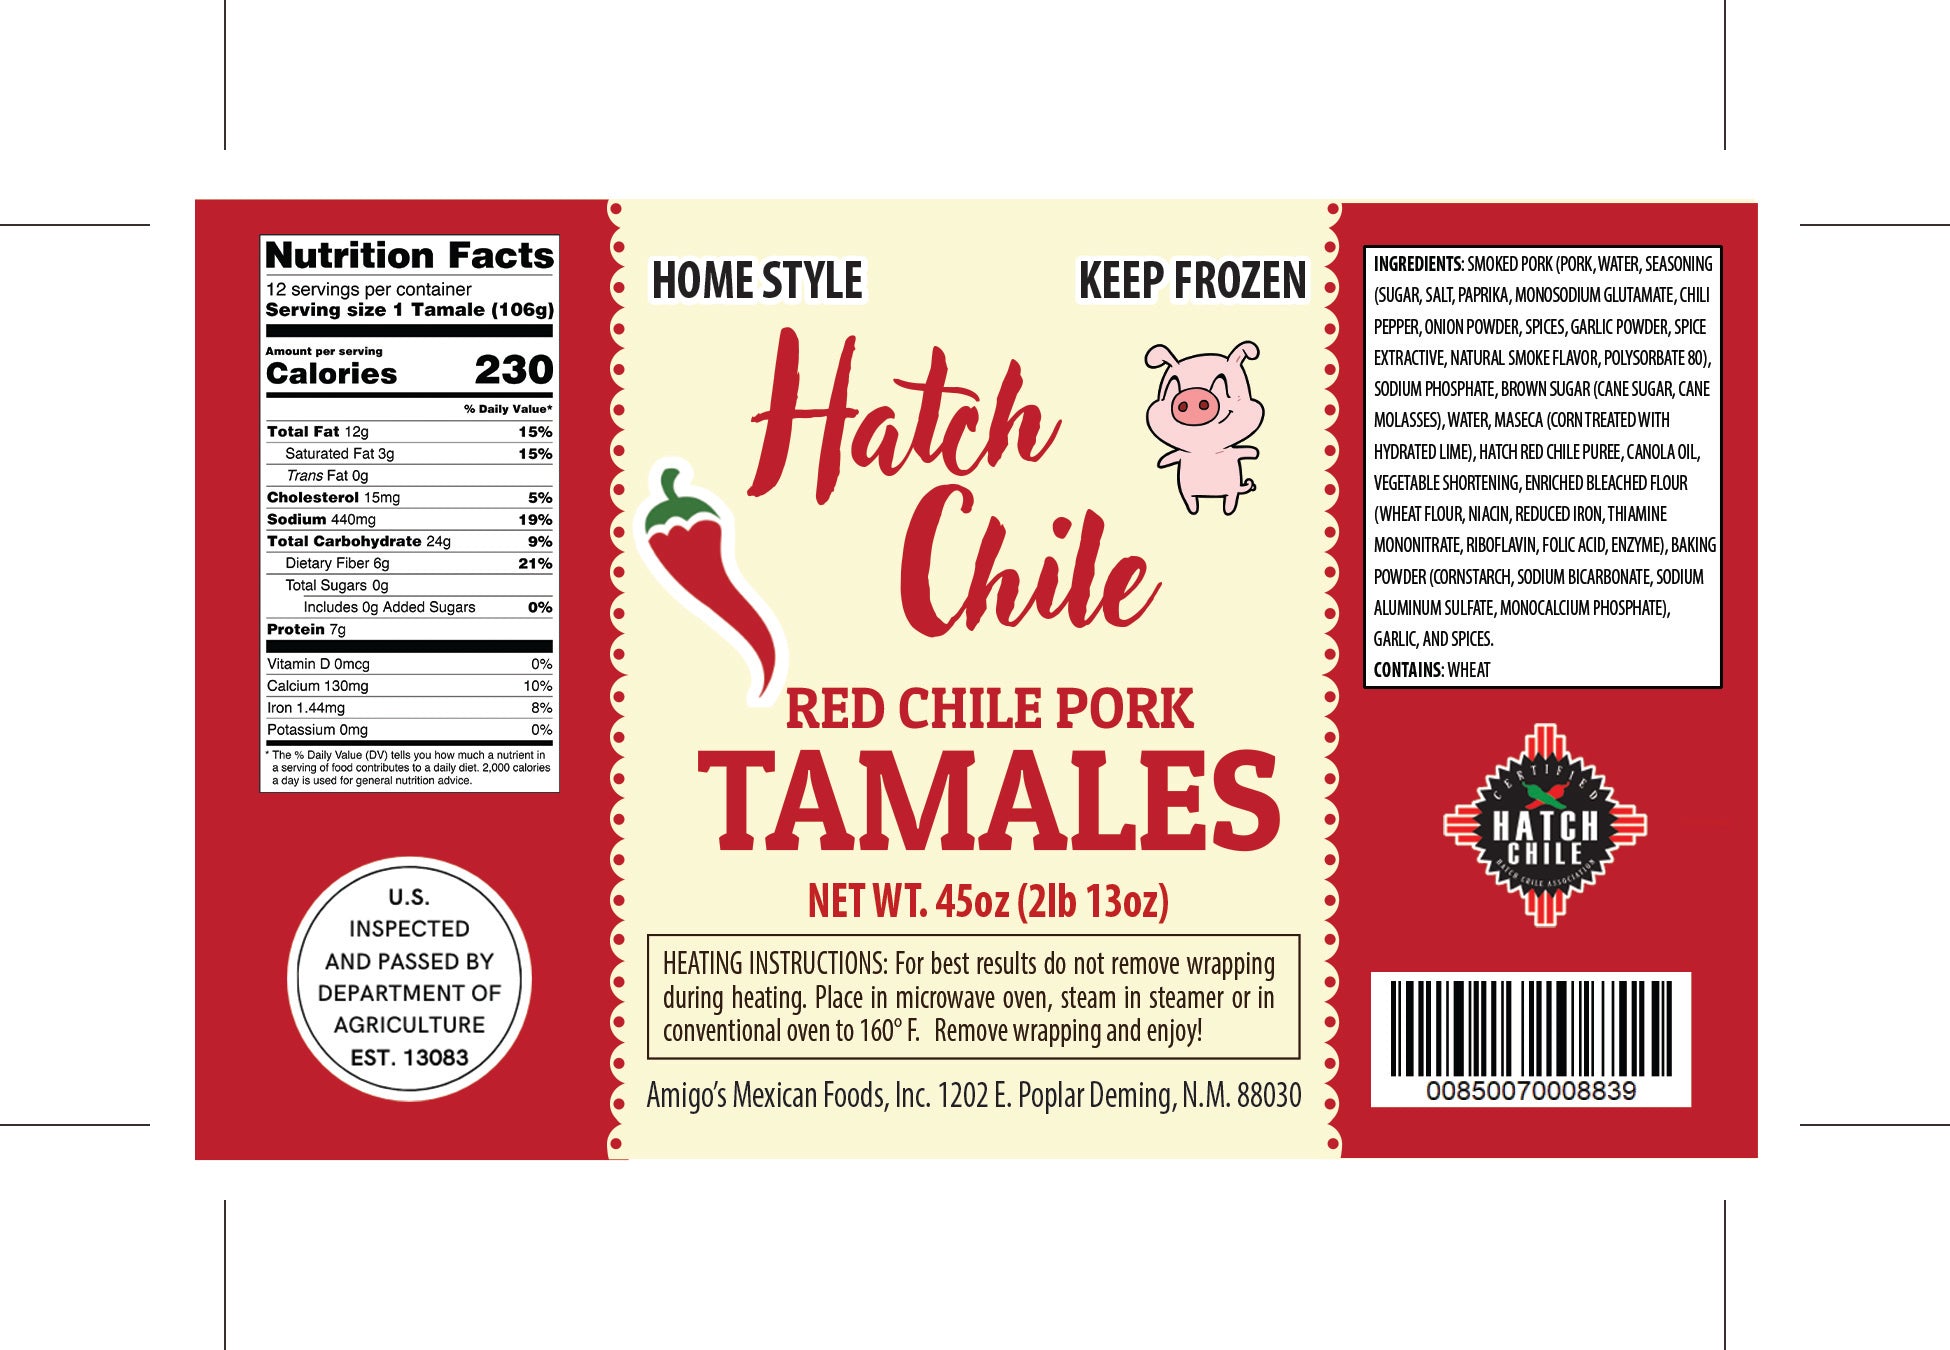 Packaging for "Hatch Red Chile Pork Tamales" with nutritional facts, instructions, and a red and white design featuring a cartoon pig and company logo.